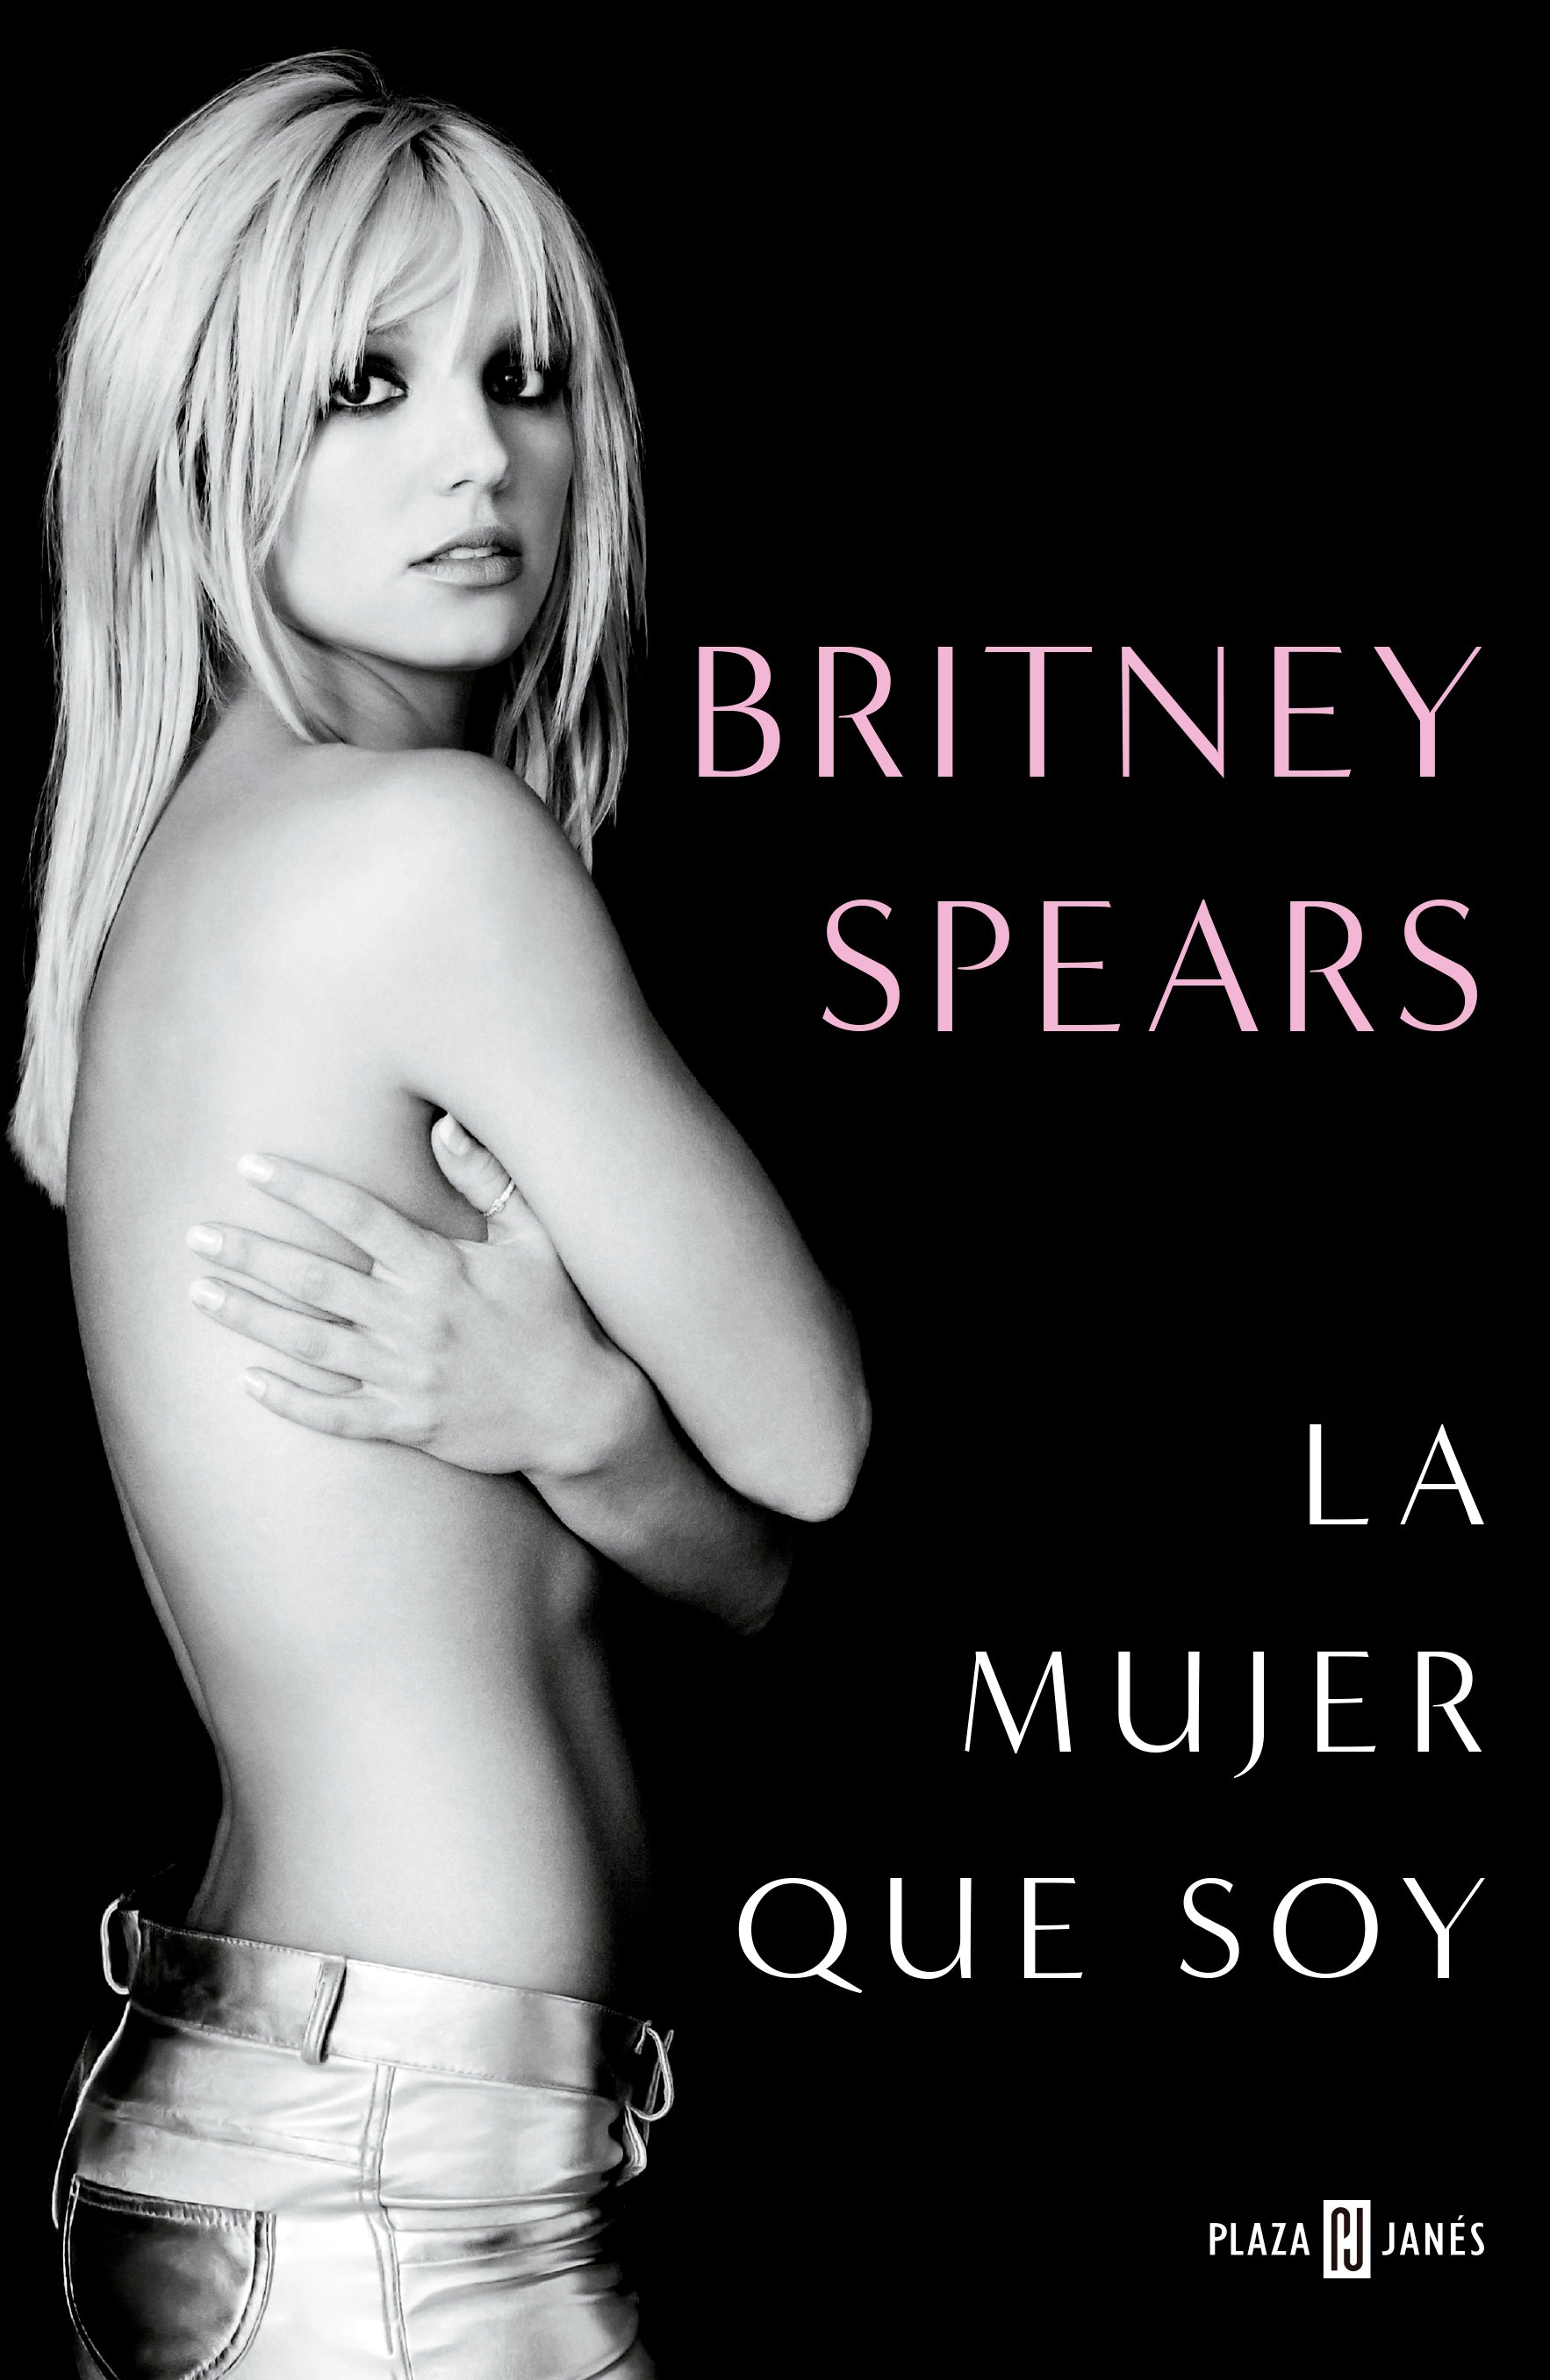 La Mujer que Soy - Britney Spears